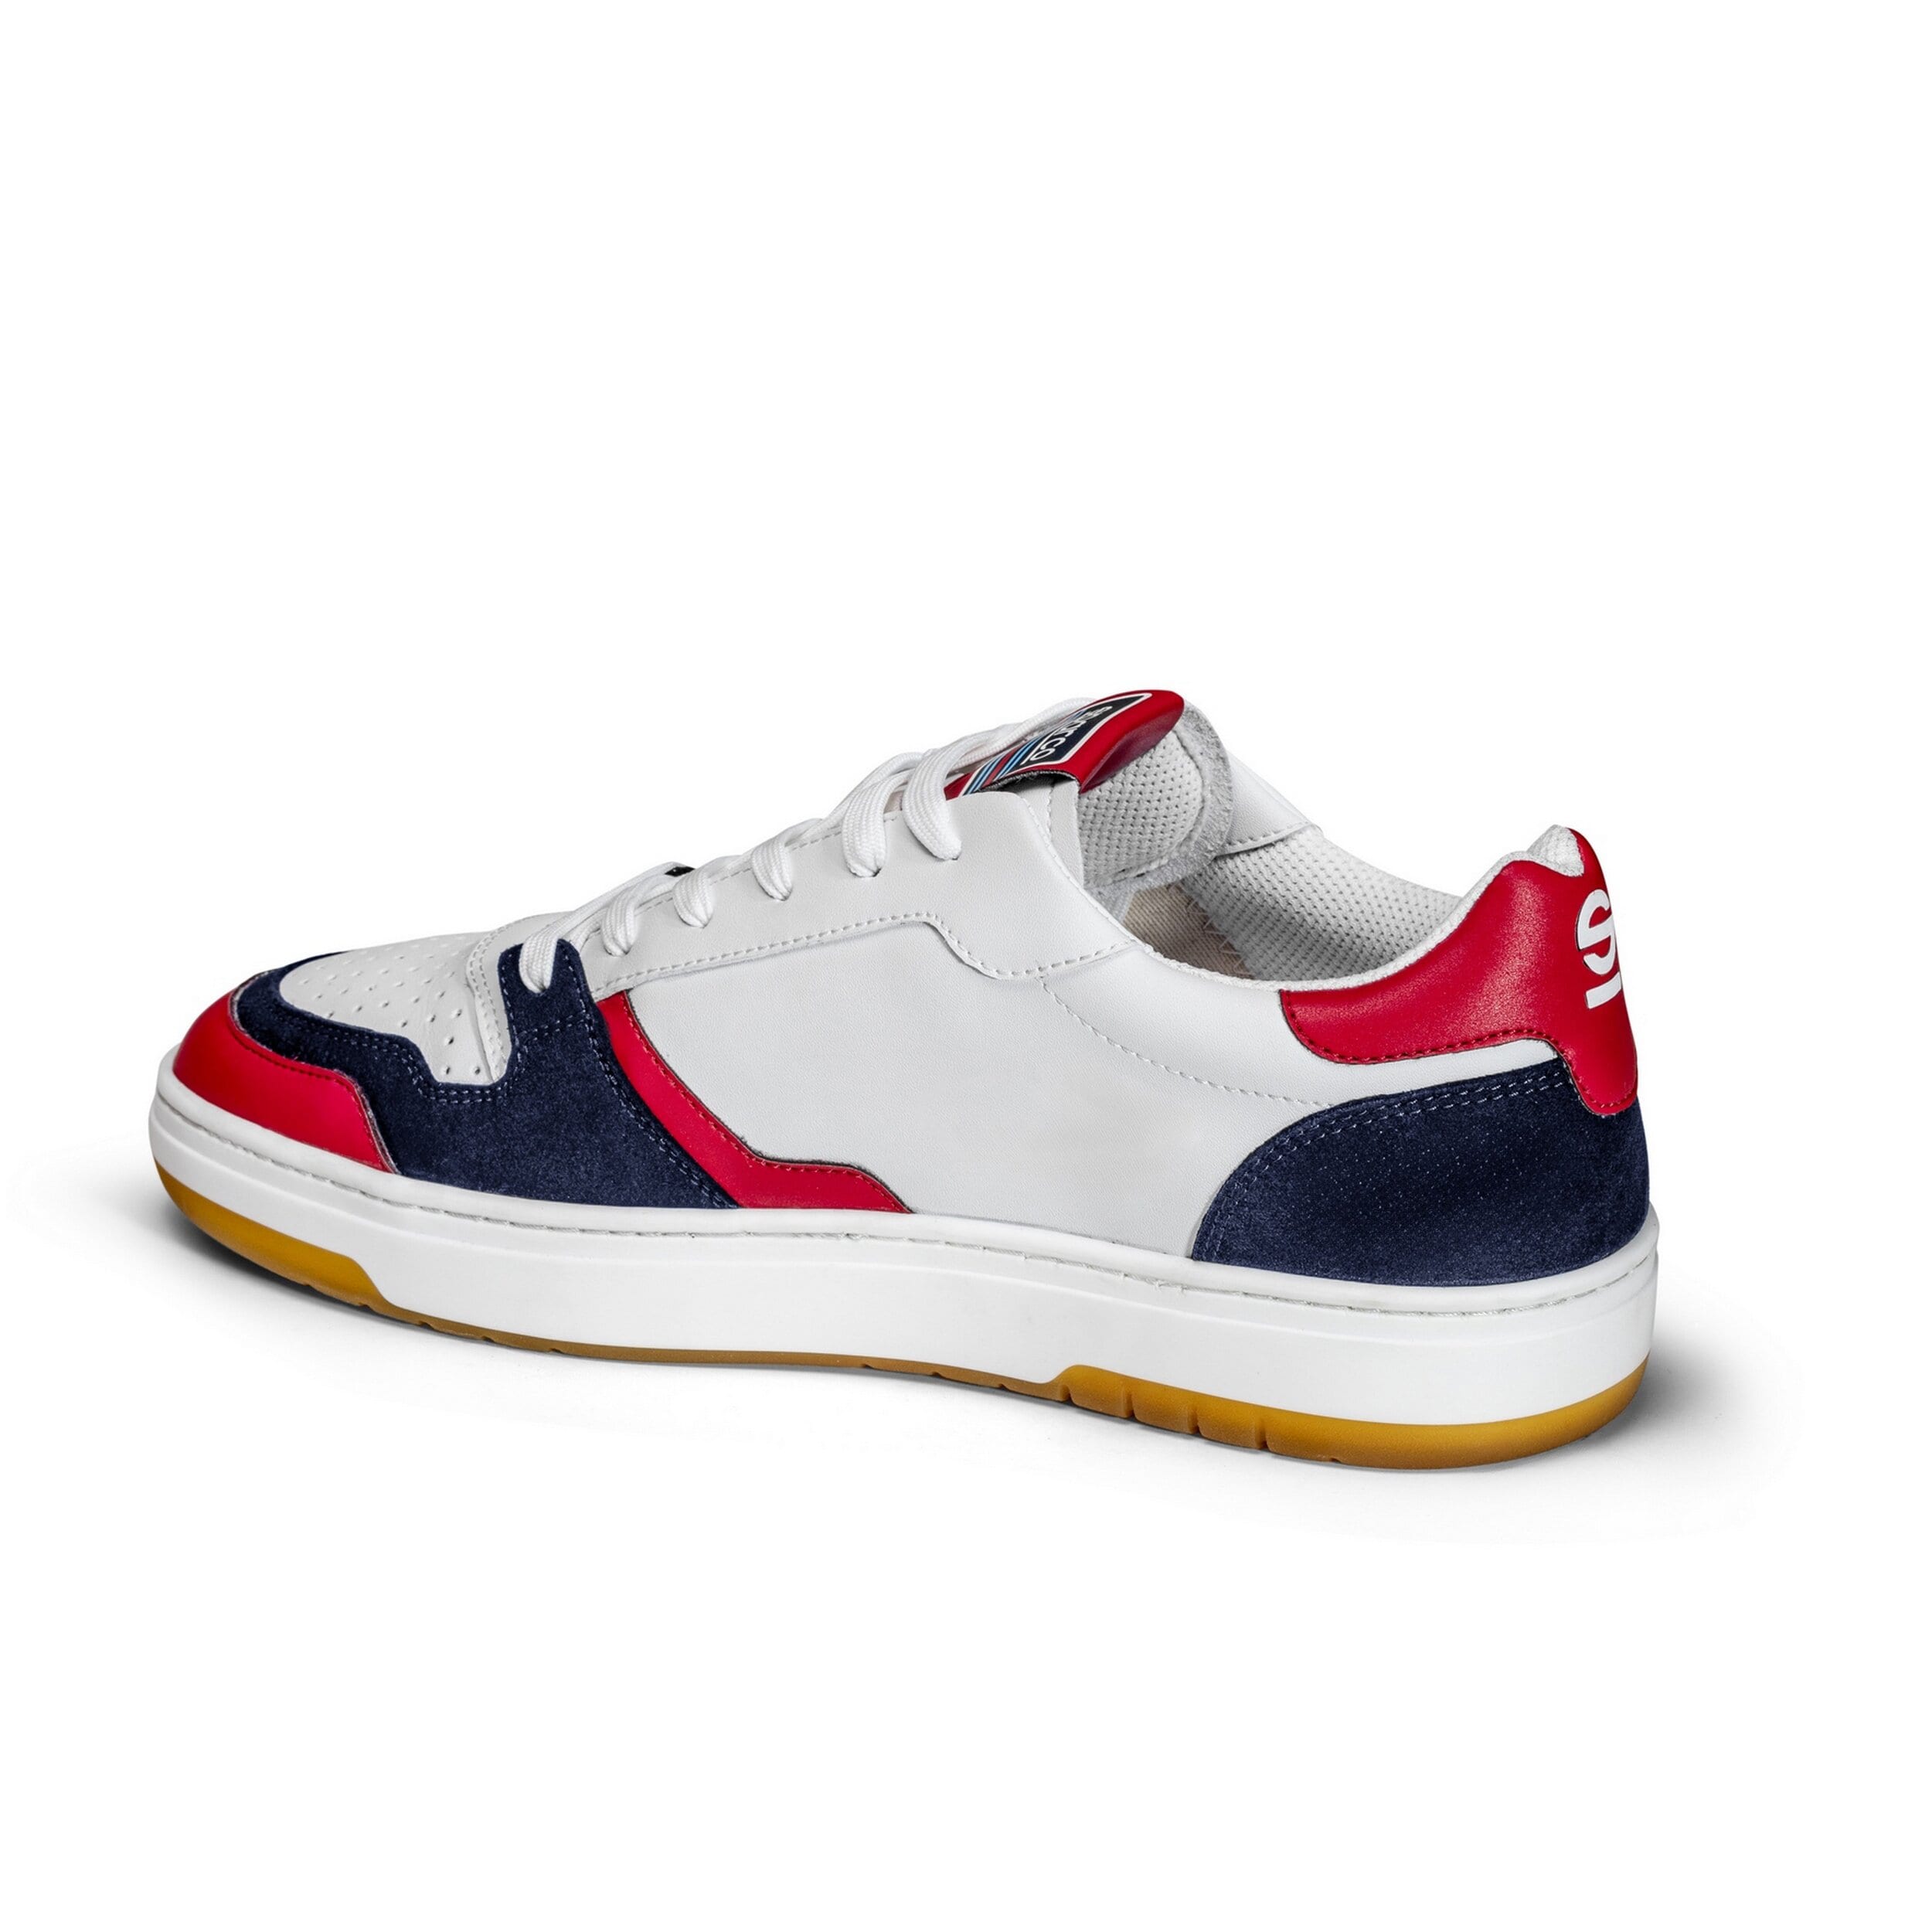 Shoes S-Urban Martini Racing Sneakers White/Blue